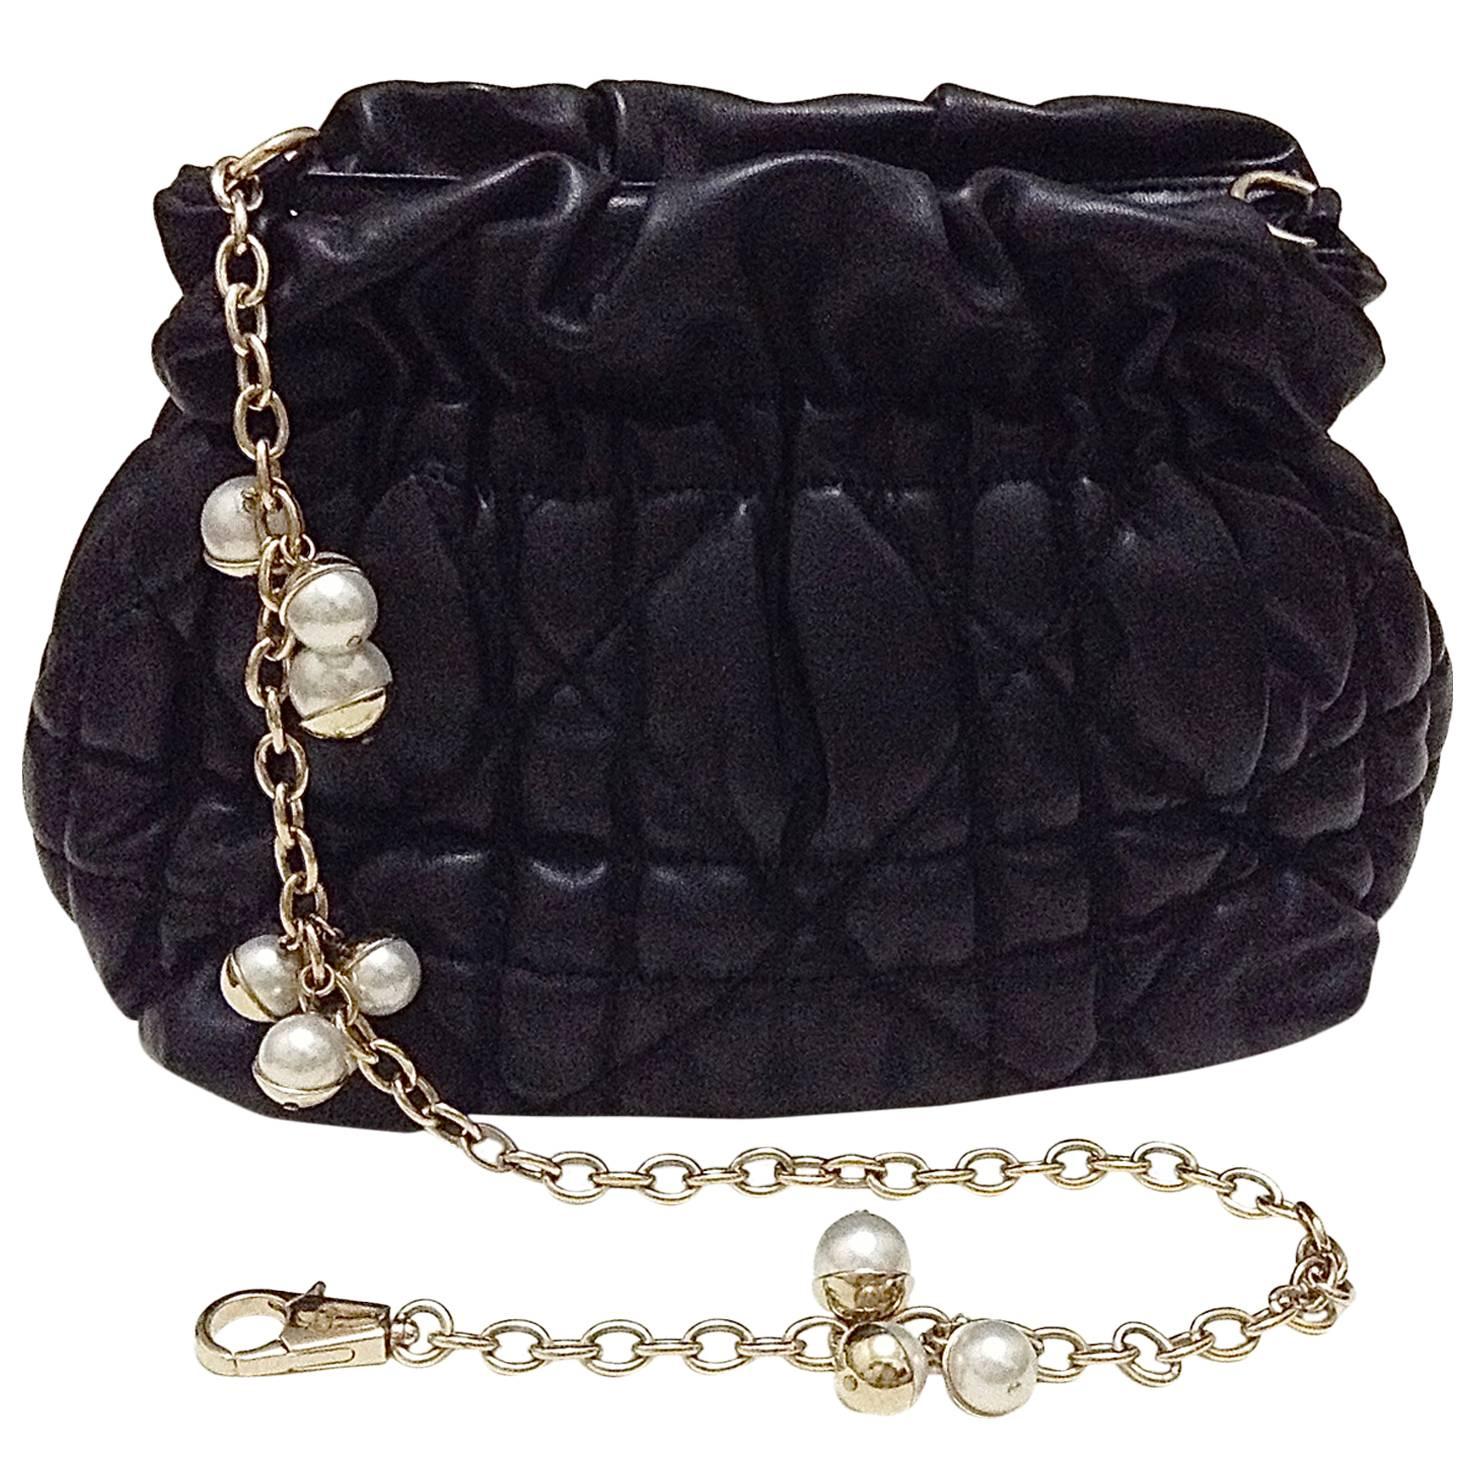  Christian Dior ✿*ﾟMISE EN DIOR Pearl Jeweled Chain Quilted Bag Handbag